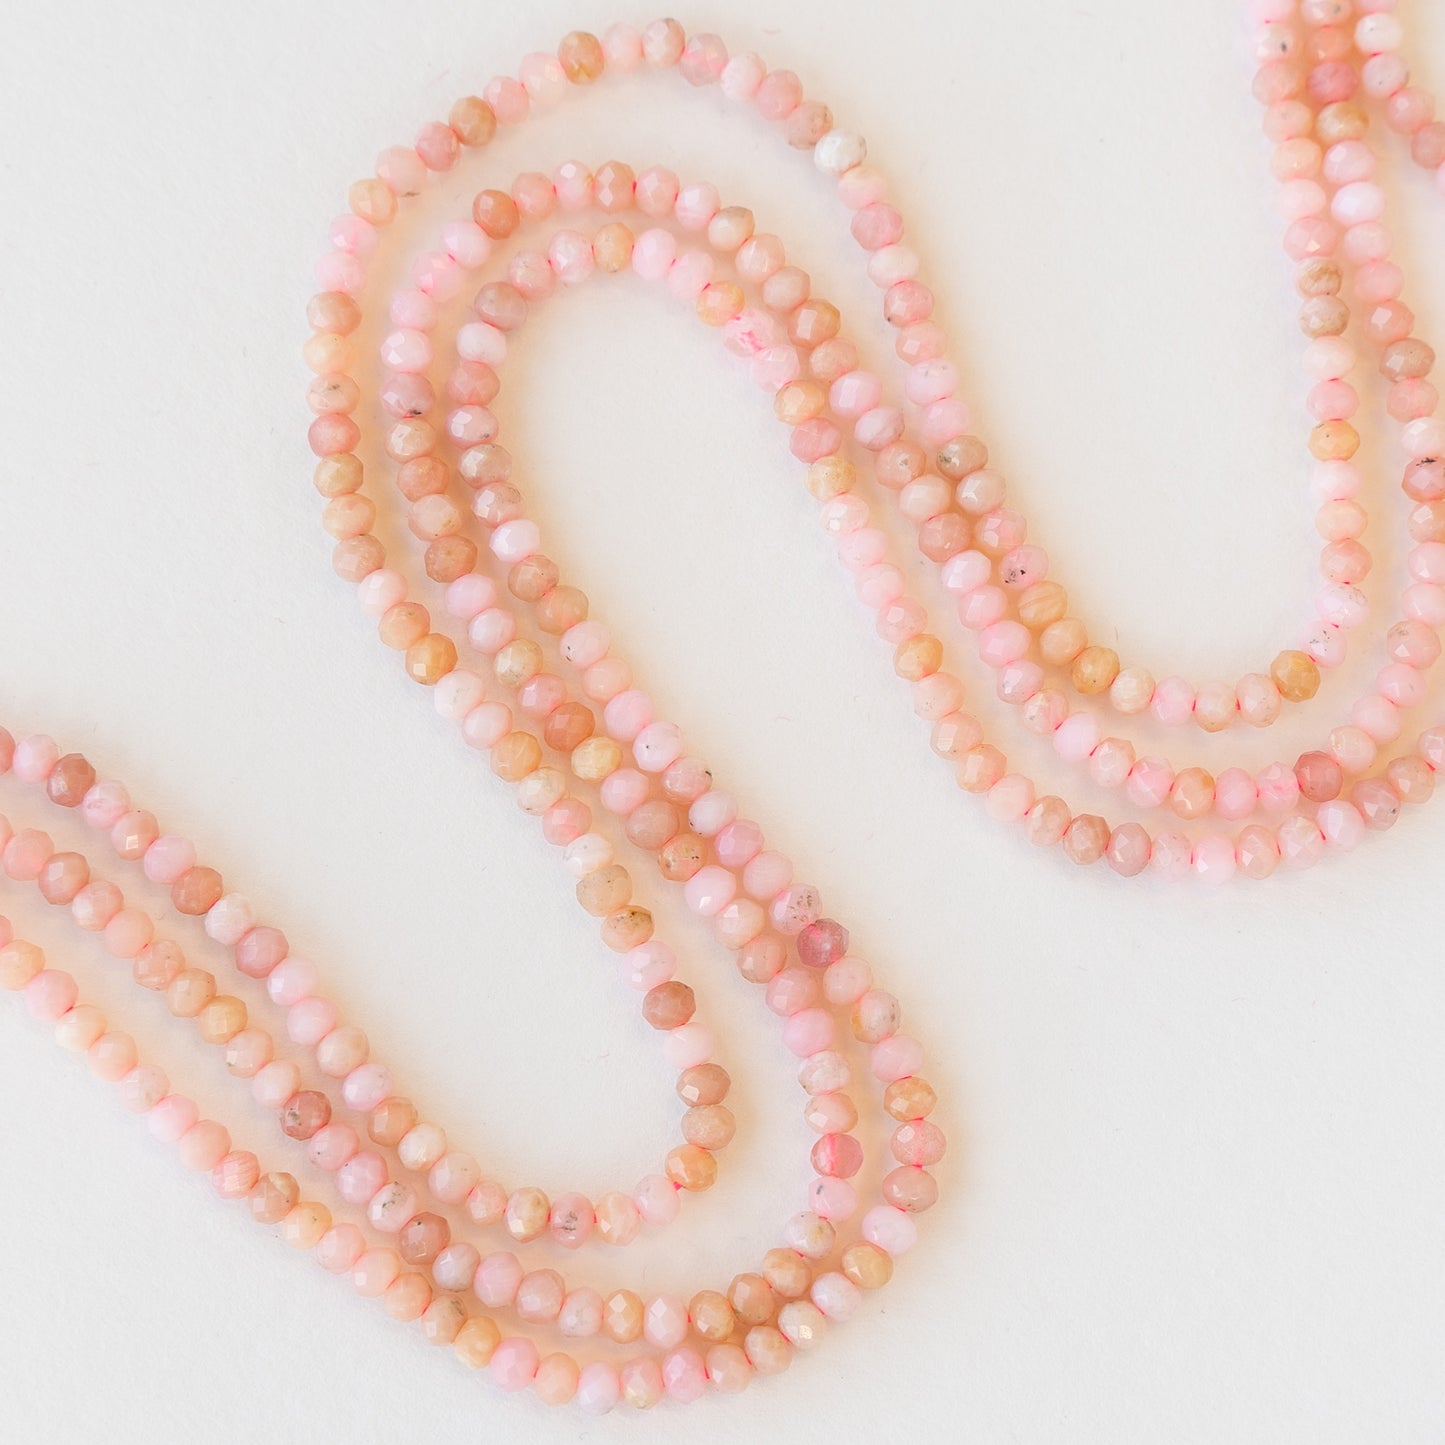 2x3mm Peruvian Pink Opal Rondelle - 16 Inches